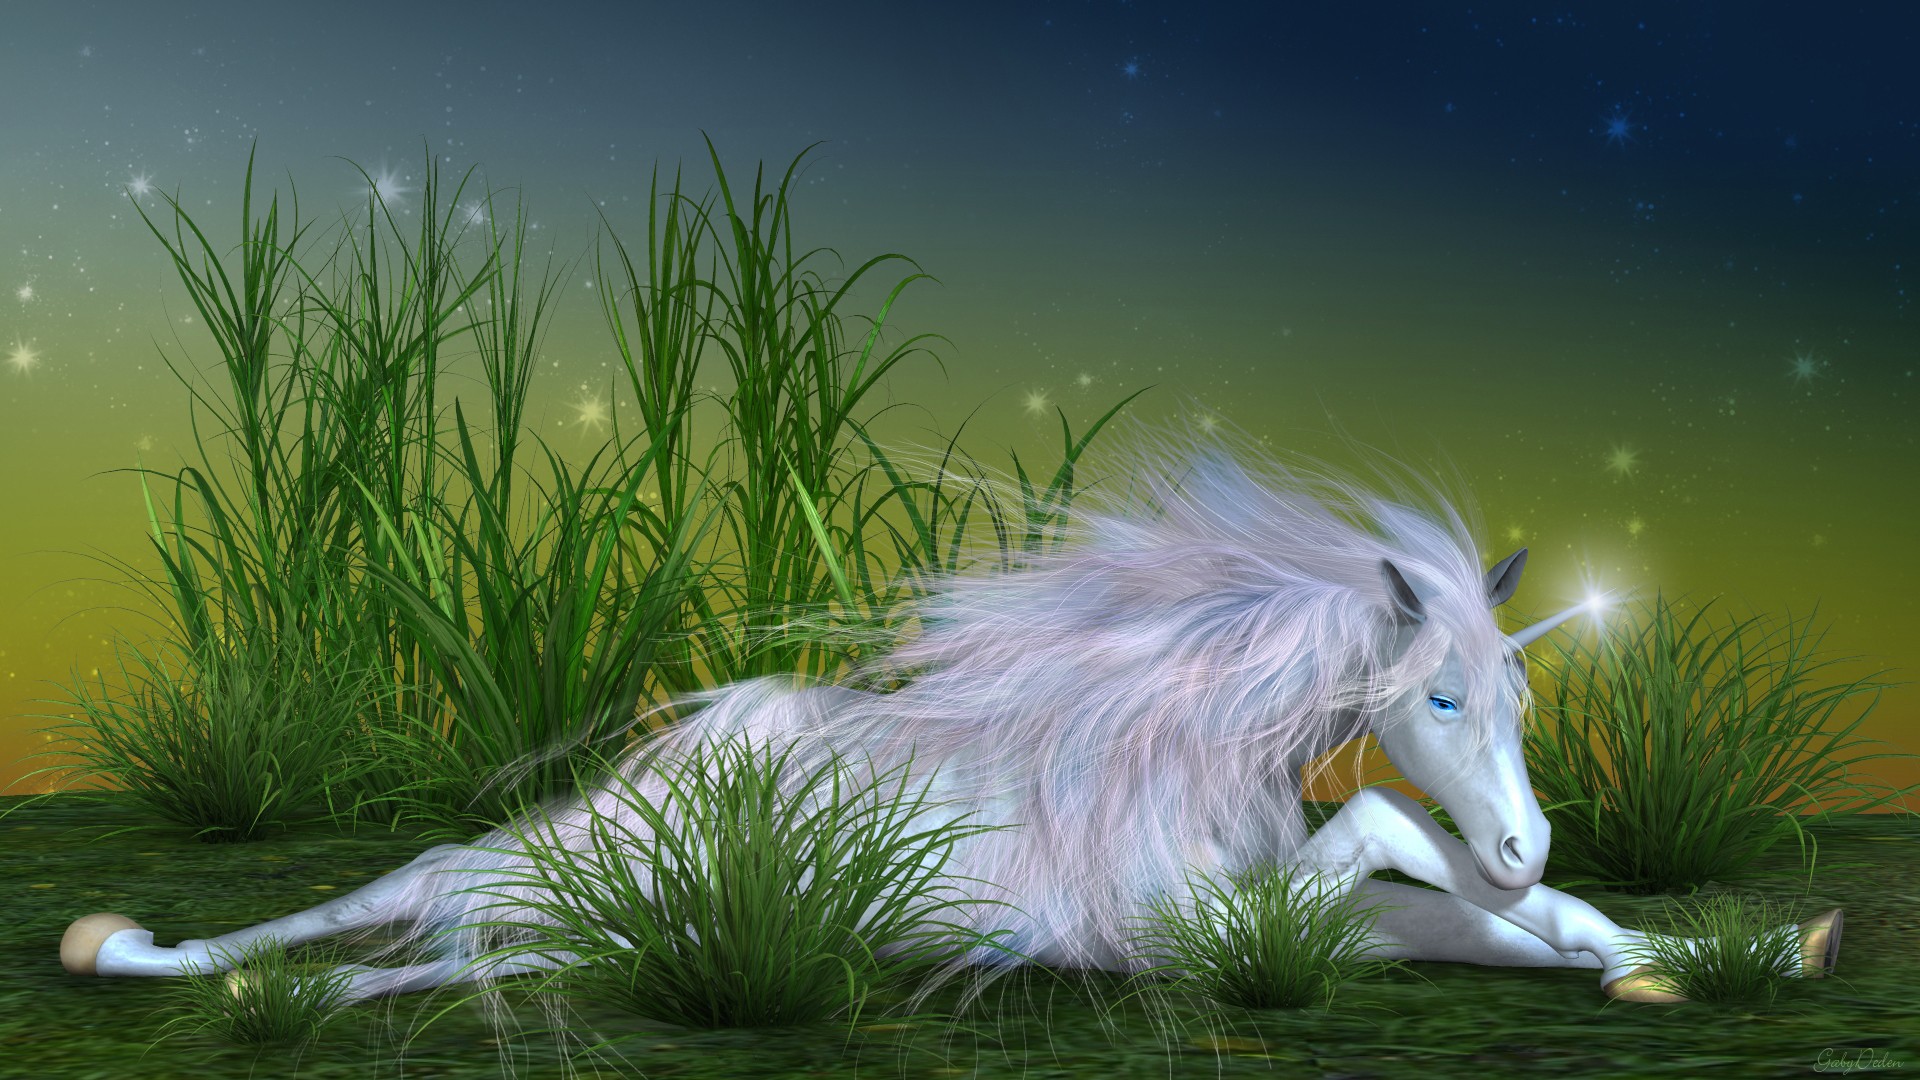 HD Cute Girly Unicorn Backgrounds with high-resolution 1920x1080 pixel. You can use this wallpaper for your Windows and Mac OS computers as well as your Android and iPhone smartphones